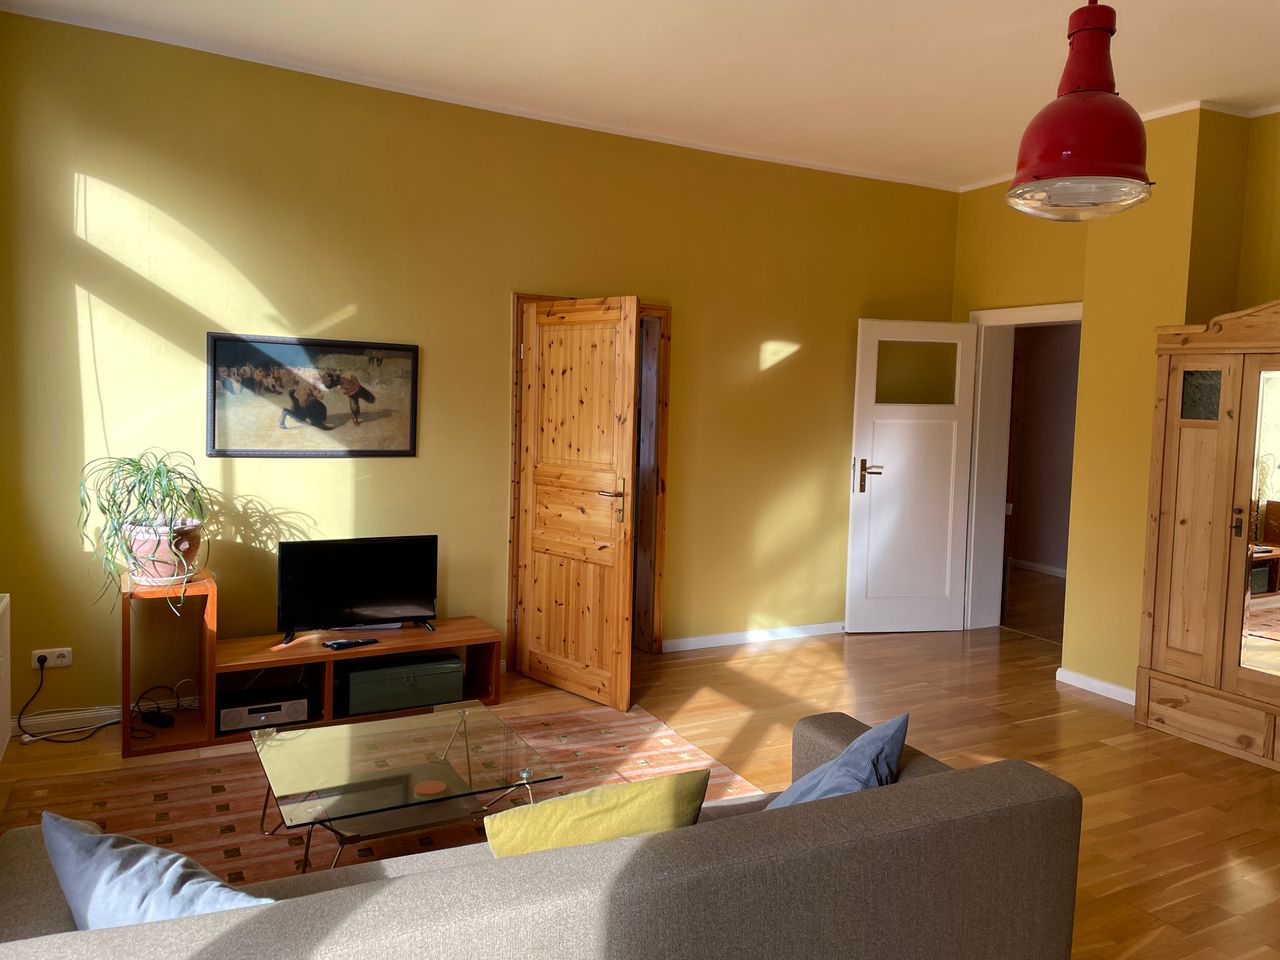 Nordend - Bright fully furnished old building apartment in central residential area